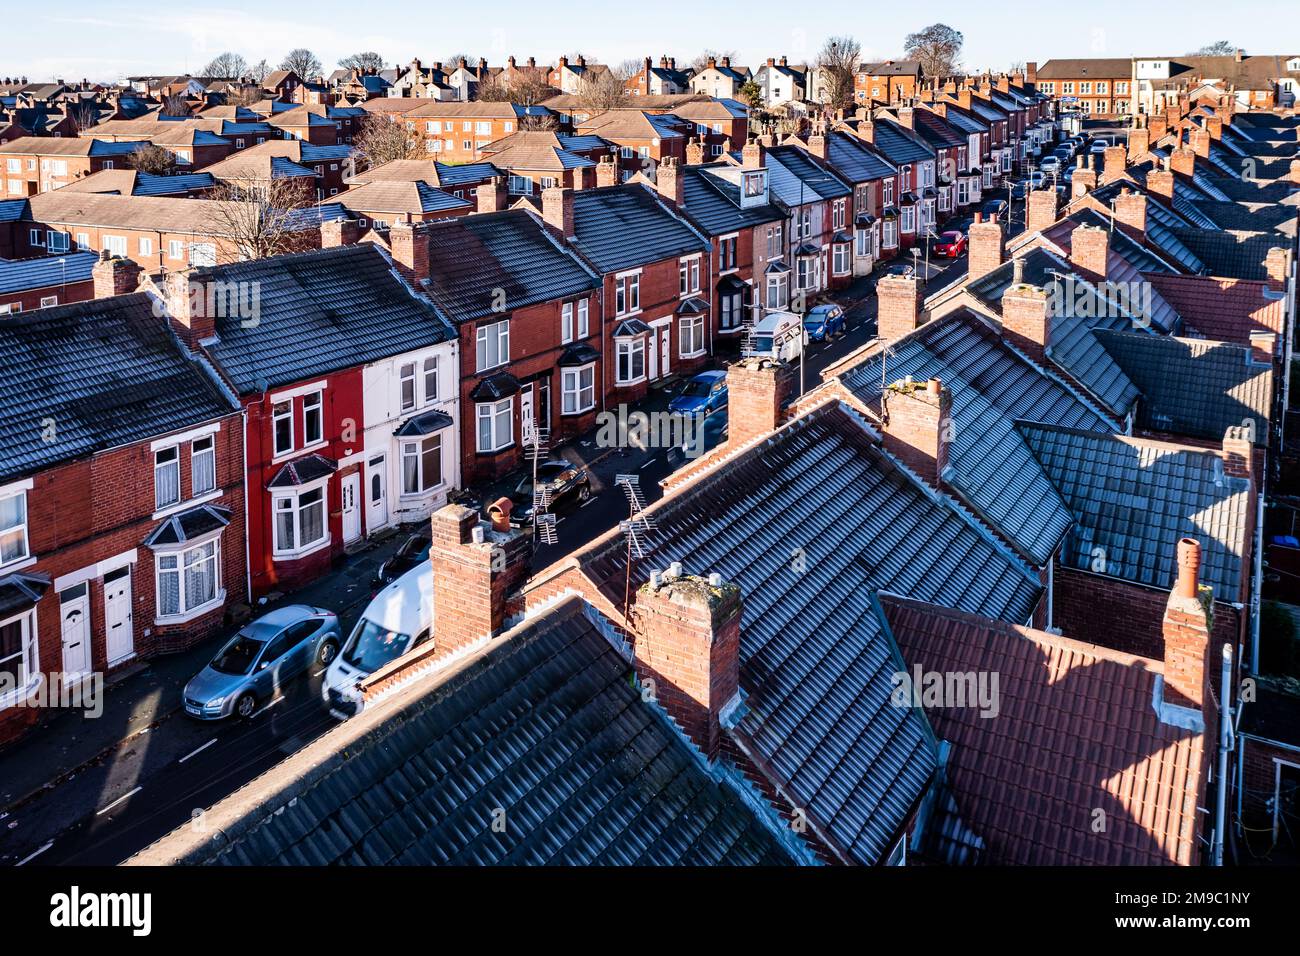 DONCASTER, UK - JANUARY 17, 2023.  Aerial view of a row of terraced or back to back houses during the Winter months with frost on rooftops during the Stock Photo